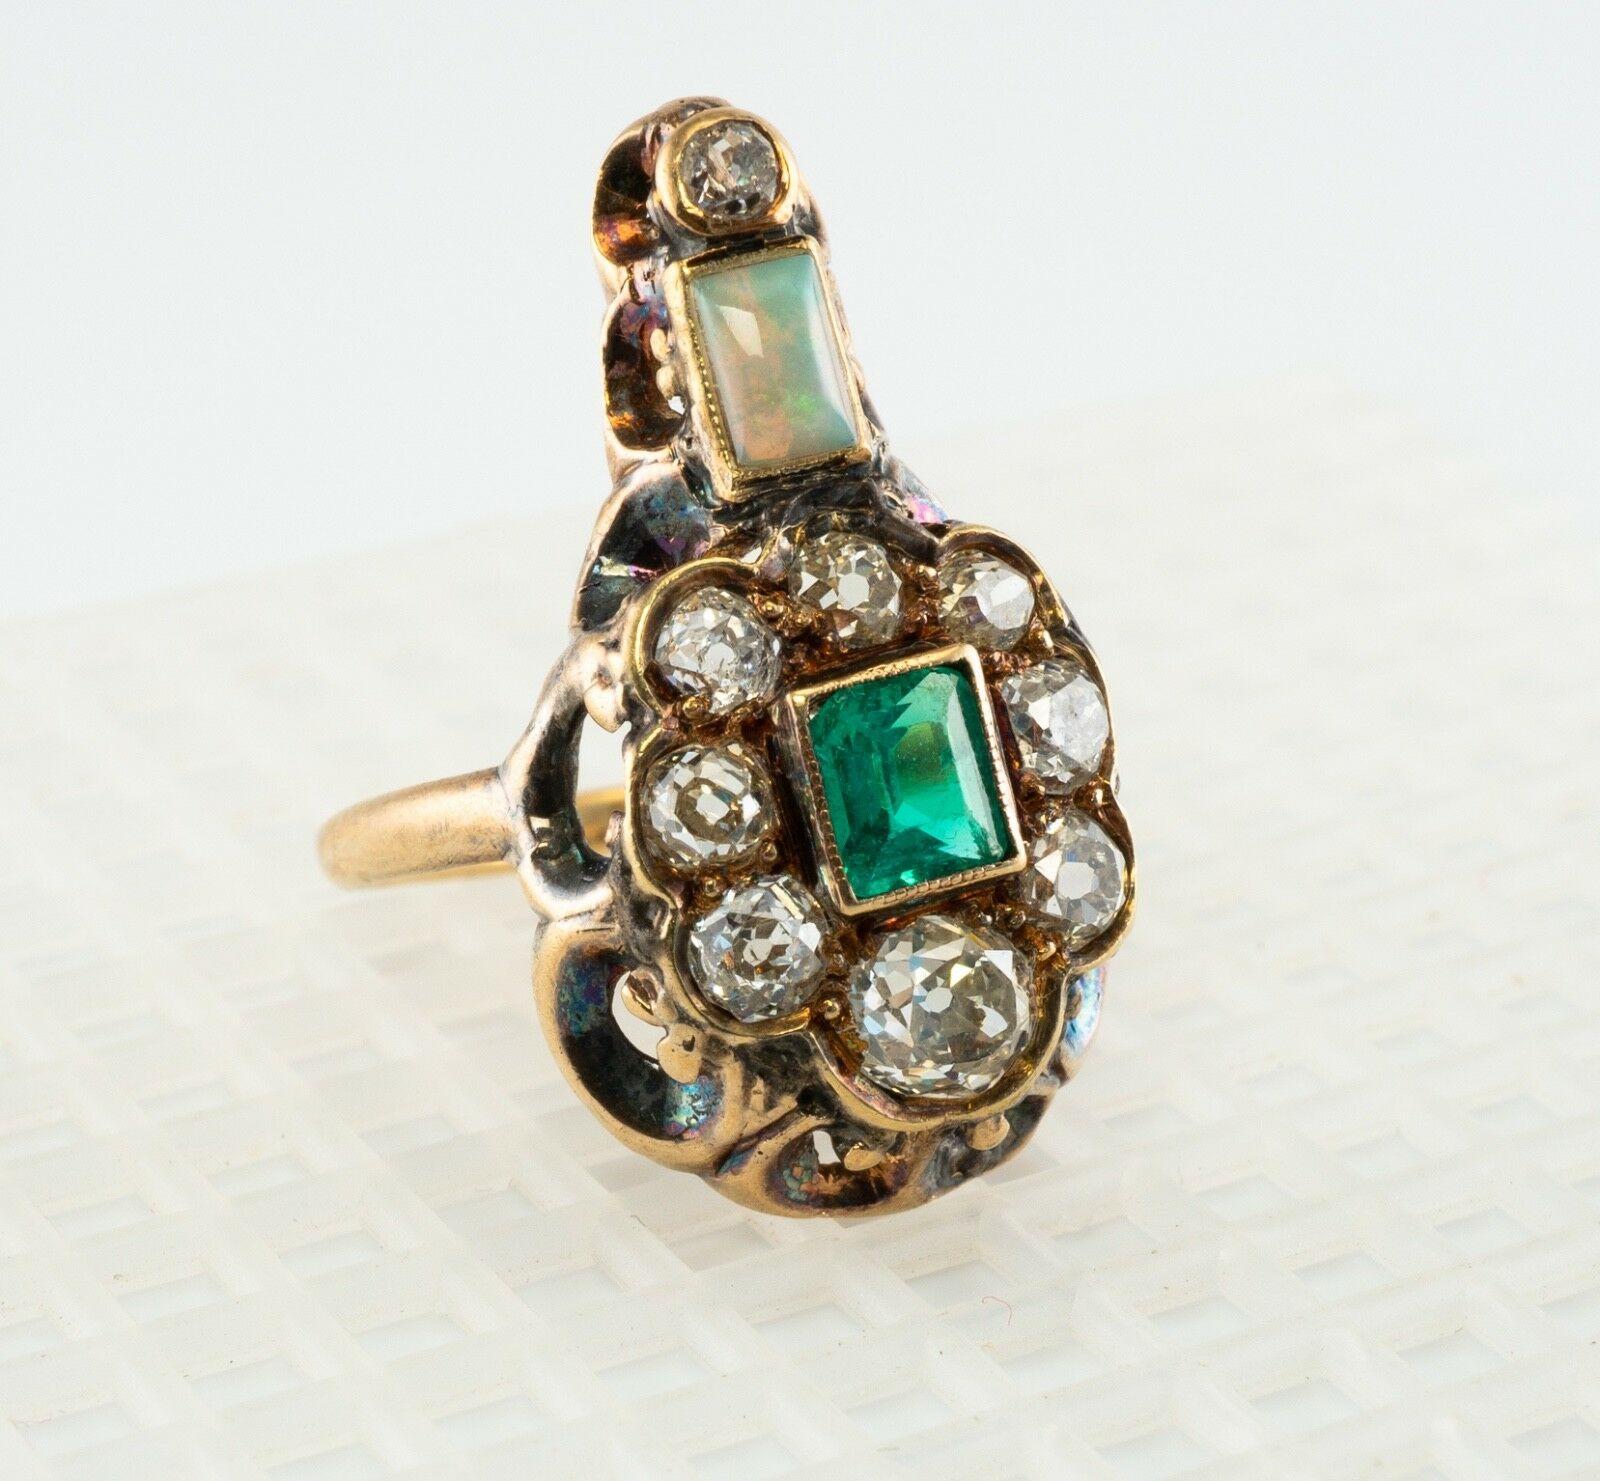 This rare and highly collectible antique ring is finely crafted in solid 14K Yellow gold (carefully tested and guaranteed). All gemstones in this ring are original to the setting. The center genuine Earth mined Colombian Emerald measures 4.5mm x 4mm